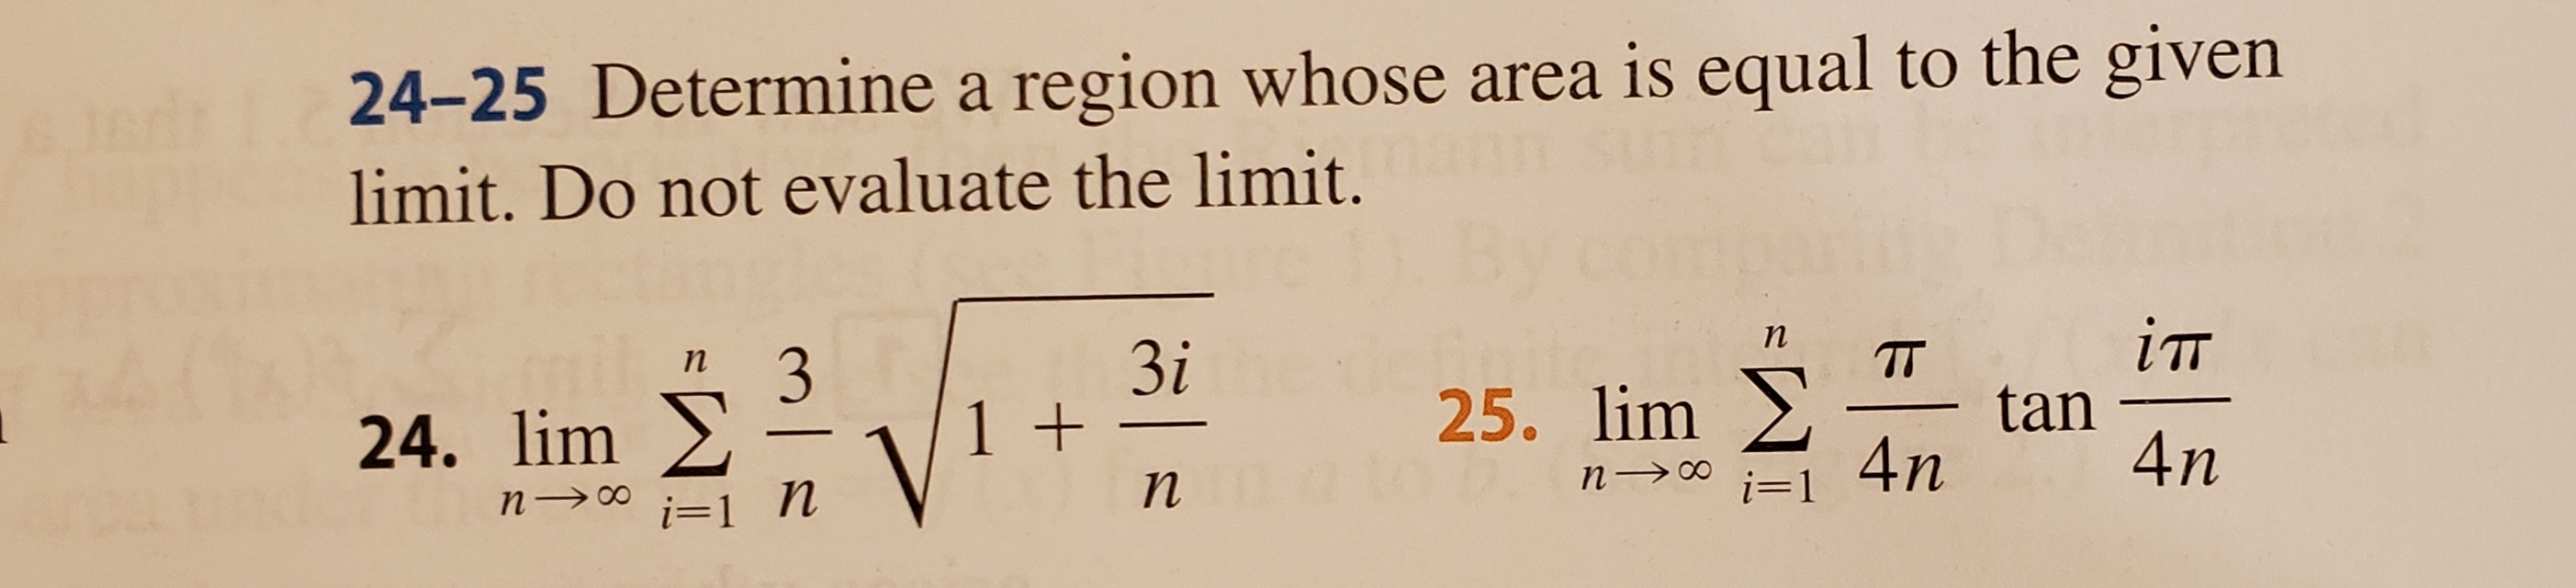 24-25 Determine a region whose area is equal to the given
limit. Do not evaluate the limit.
iTT
п
3i
1 +
TT
tan
4n
3
п
25. lim
24. lim
4n
o
i=1
n
п
п
n co
i-1
